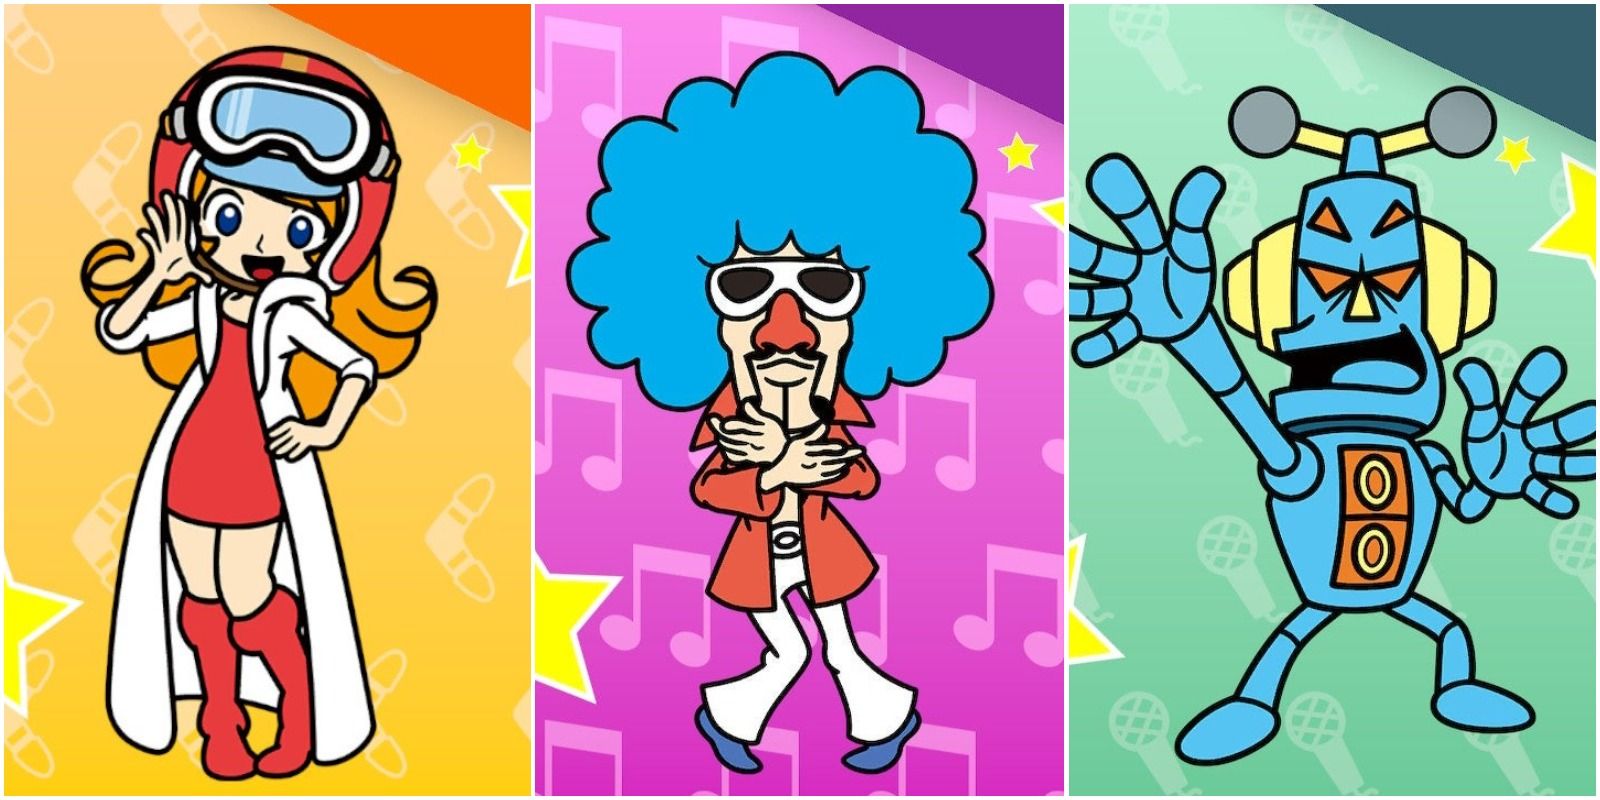 Featured image of WarioWare: Get It Together! characters